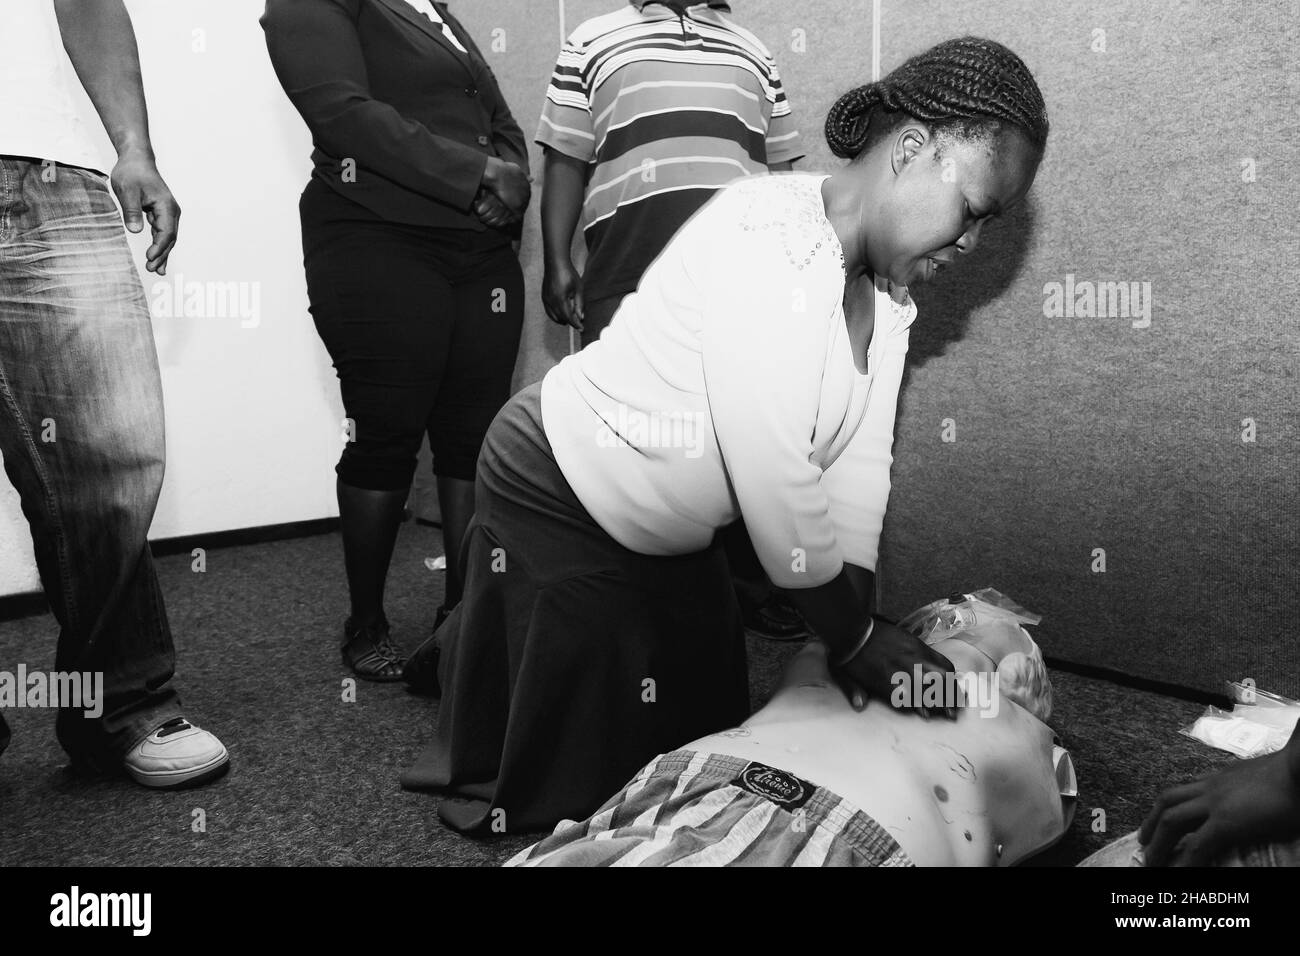 JOHANNESBURG, SOUTH AFRICA - Aug 12, 2021: A grayscale shot of Aid CPR training with plastic dummy. Stock Photo